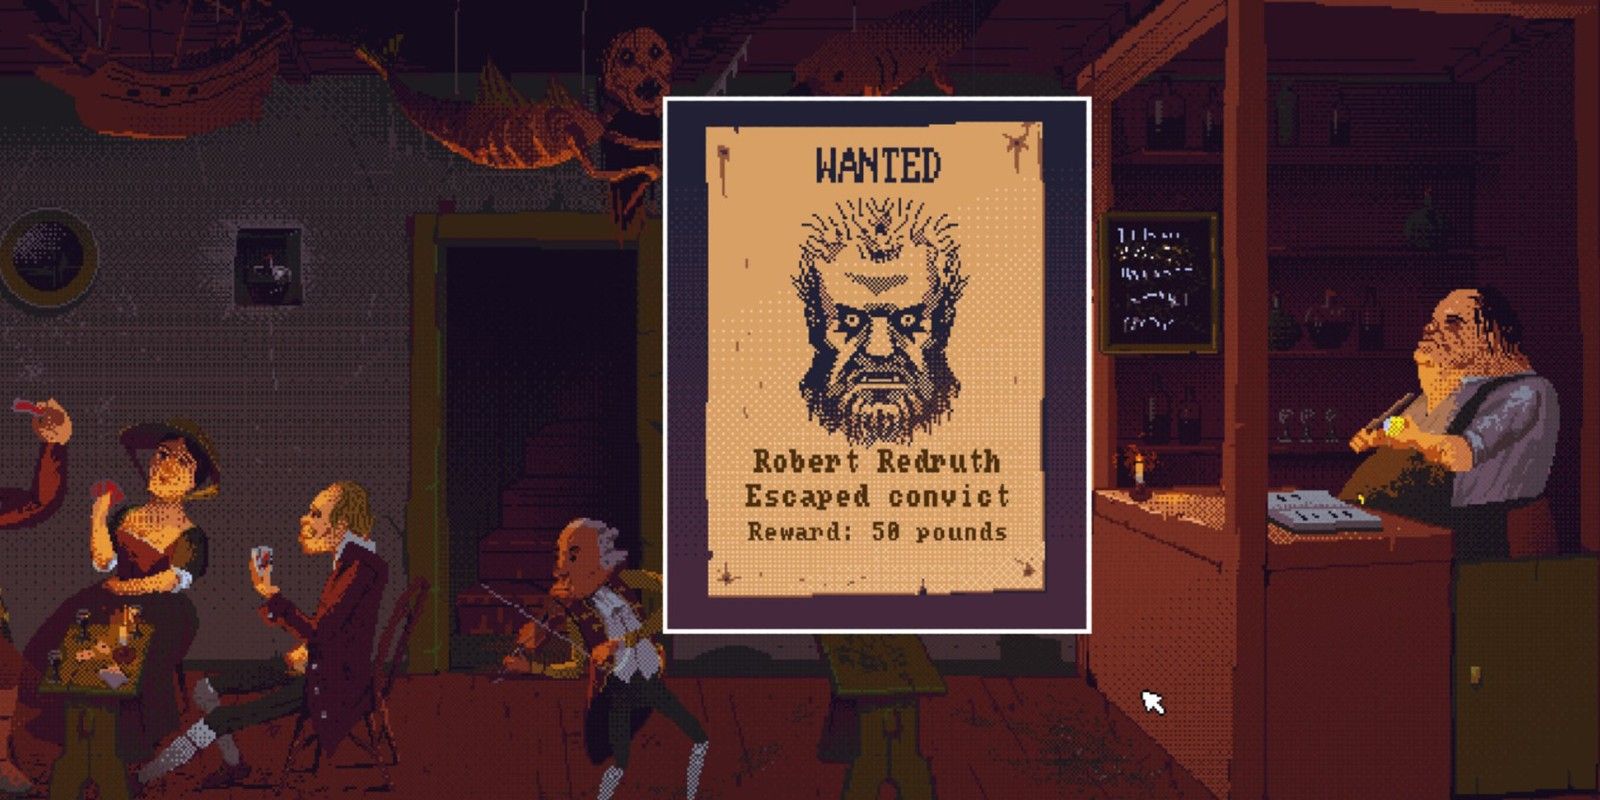 A wanted poster in The Case of the Golden Idol for Robert Redruth, an Escaped Convict. A man is playing violin in the background while two others play cards and a bartender cuts a lemon.